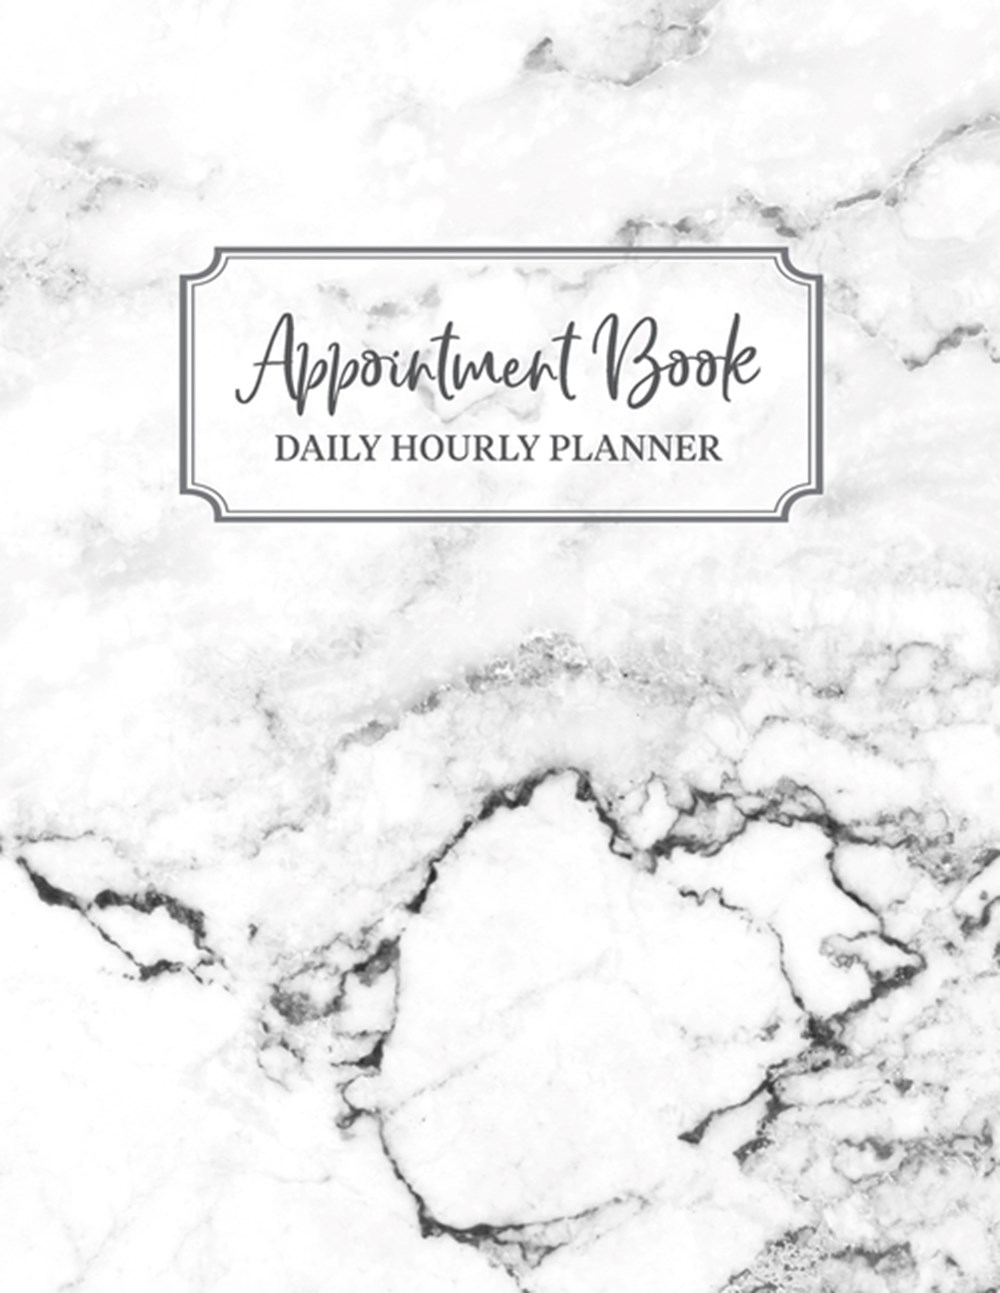 Undated Appointment Book Appointment Planner, Daily Hourly Planner Undated Daily Planner Monday - Su